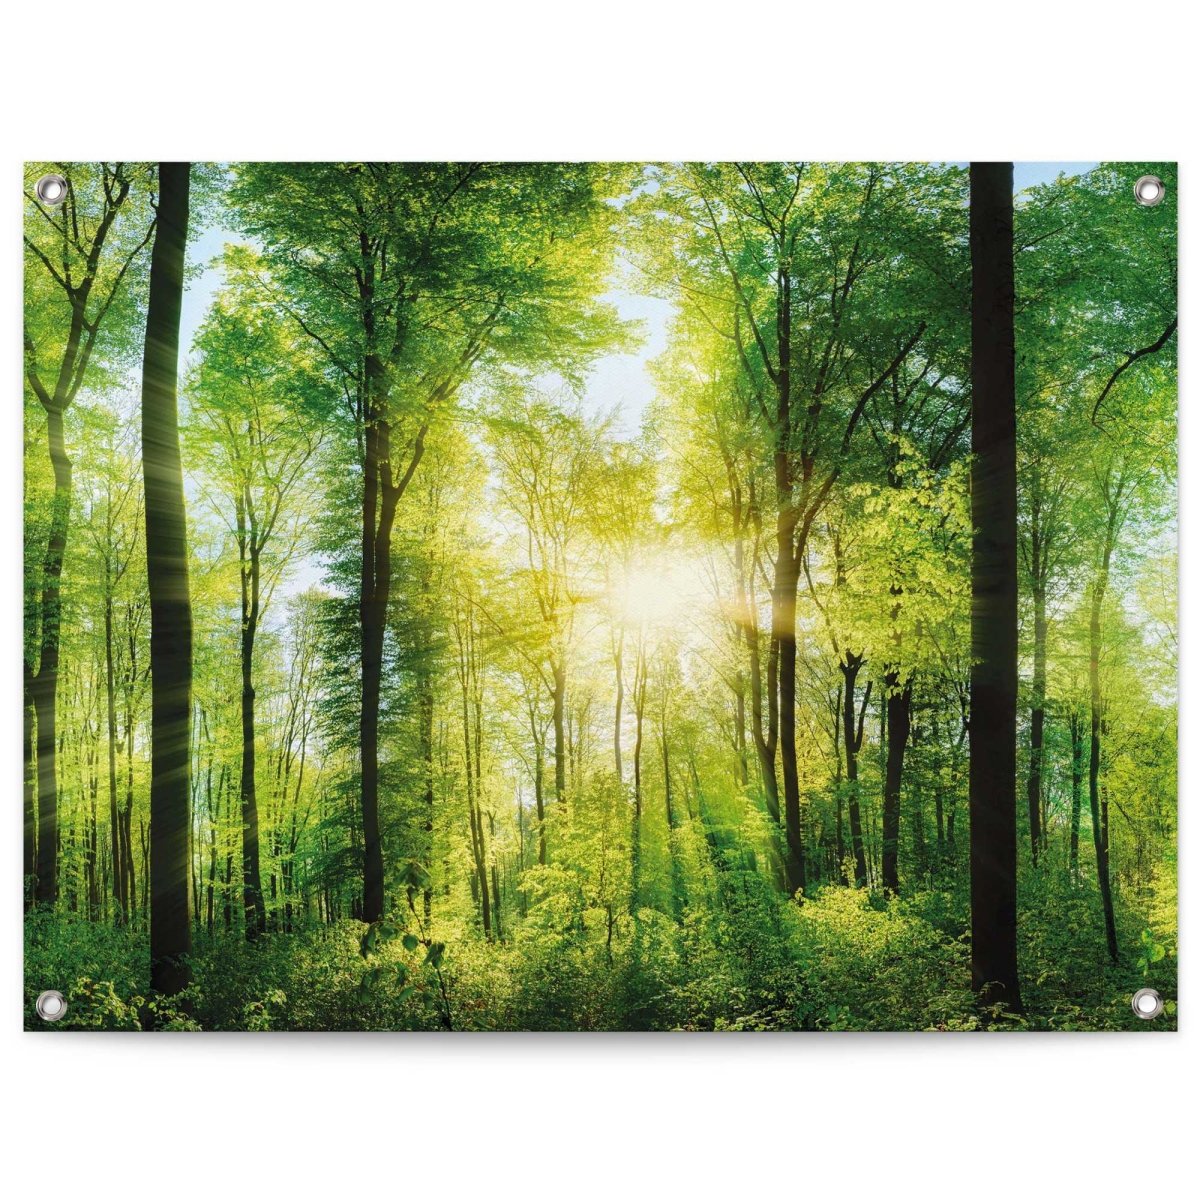 Tuinposter Zomer bos 60x80 - Reinders